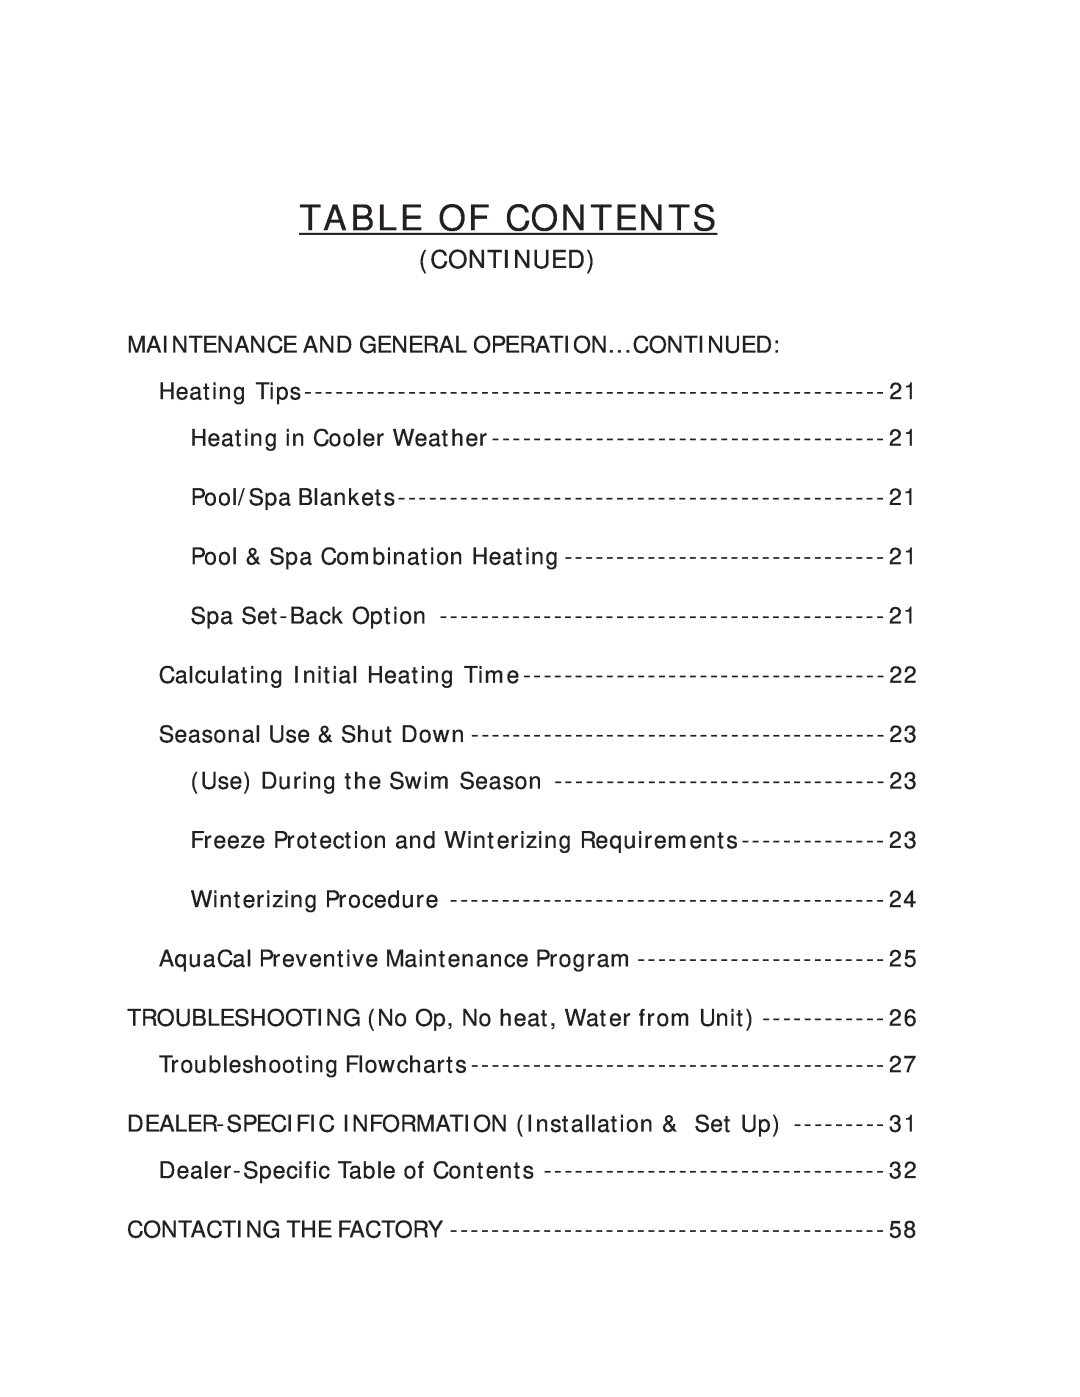 Aquacal 100 owner manual Continued, Table Of Contents 